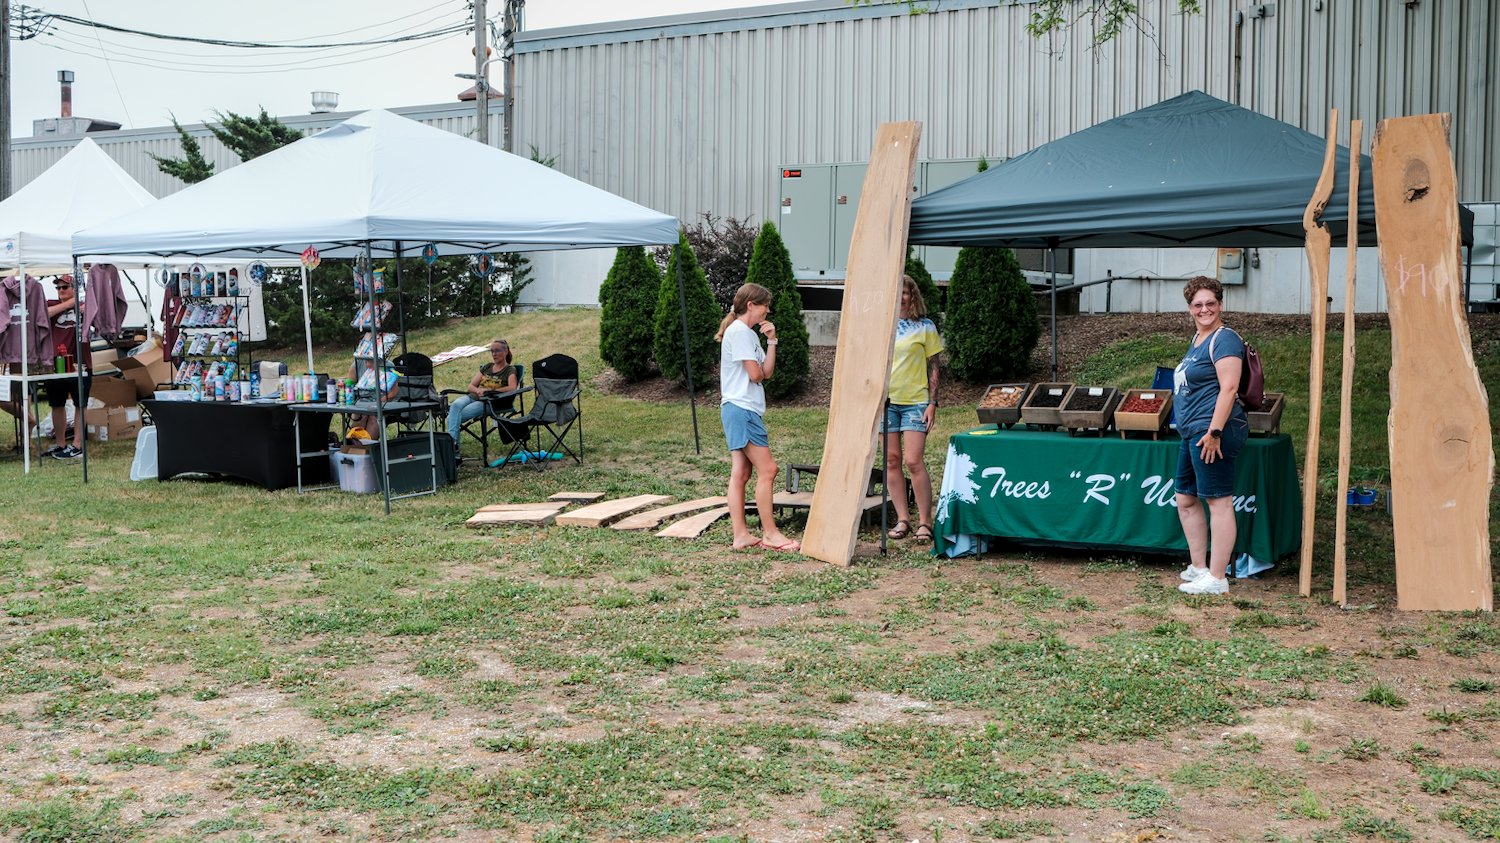 Trees "R" Us Inc. tent featuring mulch and live edge slabs.